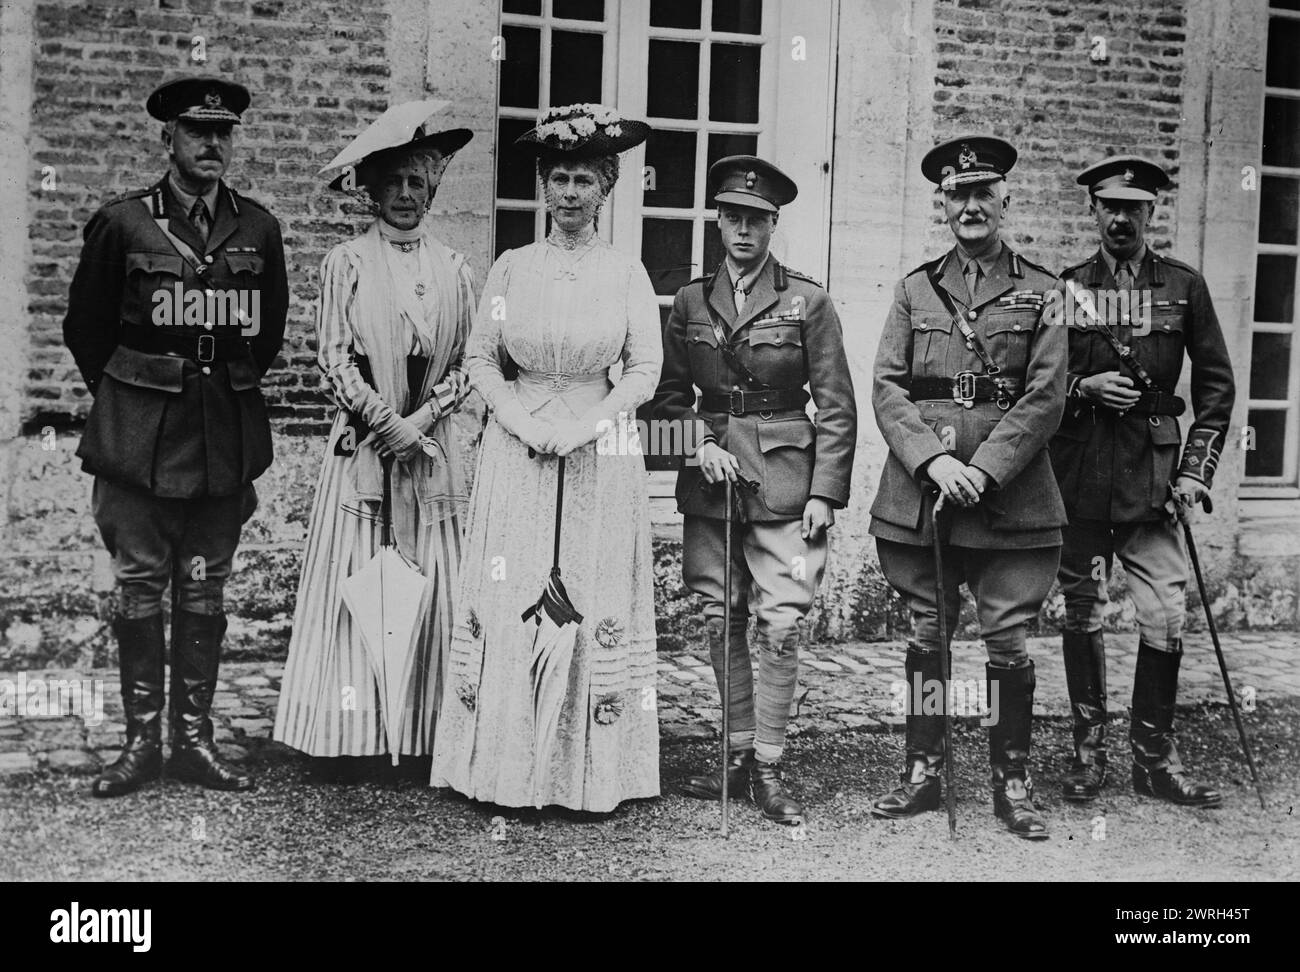 Sir Arthur Sloggett, Queen Mary, Prince of Wales, 11 Jul 1917. Shows (left to right): Brigader-General Anthony Ashley Cooper, Mabel Ogilvy, Countess of Airlee; Queen Mary, Edward VIII, Prince of Wales; Sir Arthur Sloggett and General Charles Foulkes at Montigny, July 11, 1917 during World War I. Stock Photo